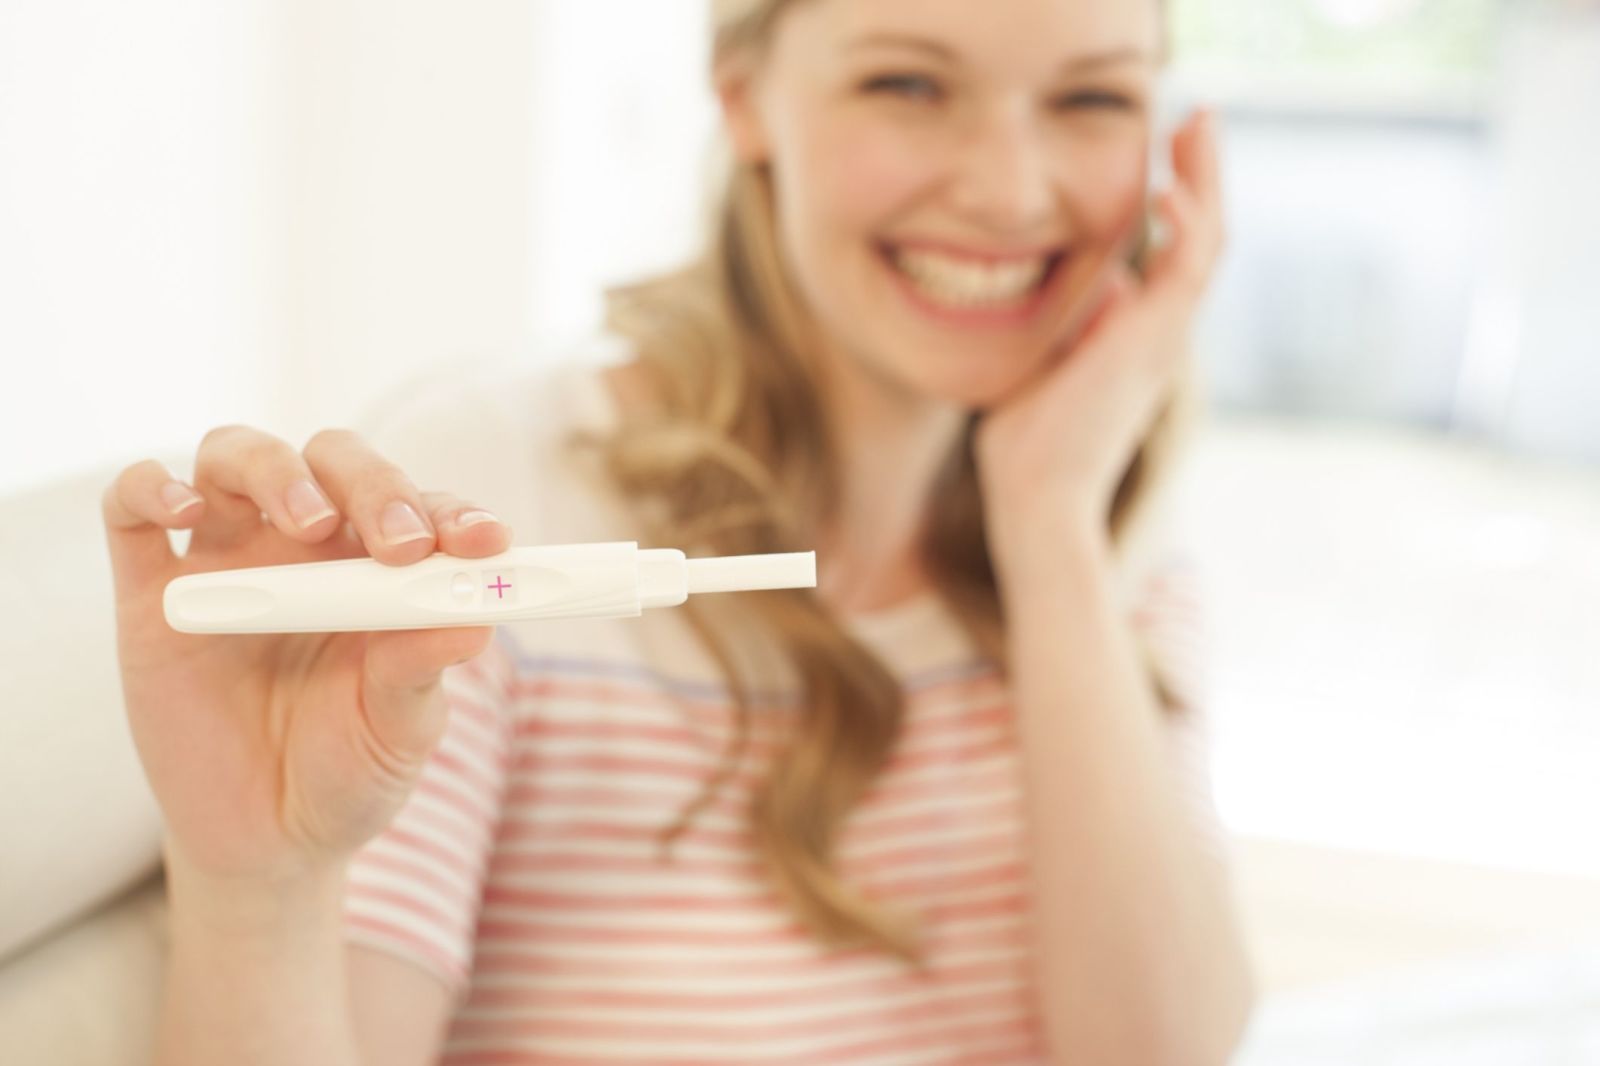 Four tips for taking control of your fertility